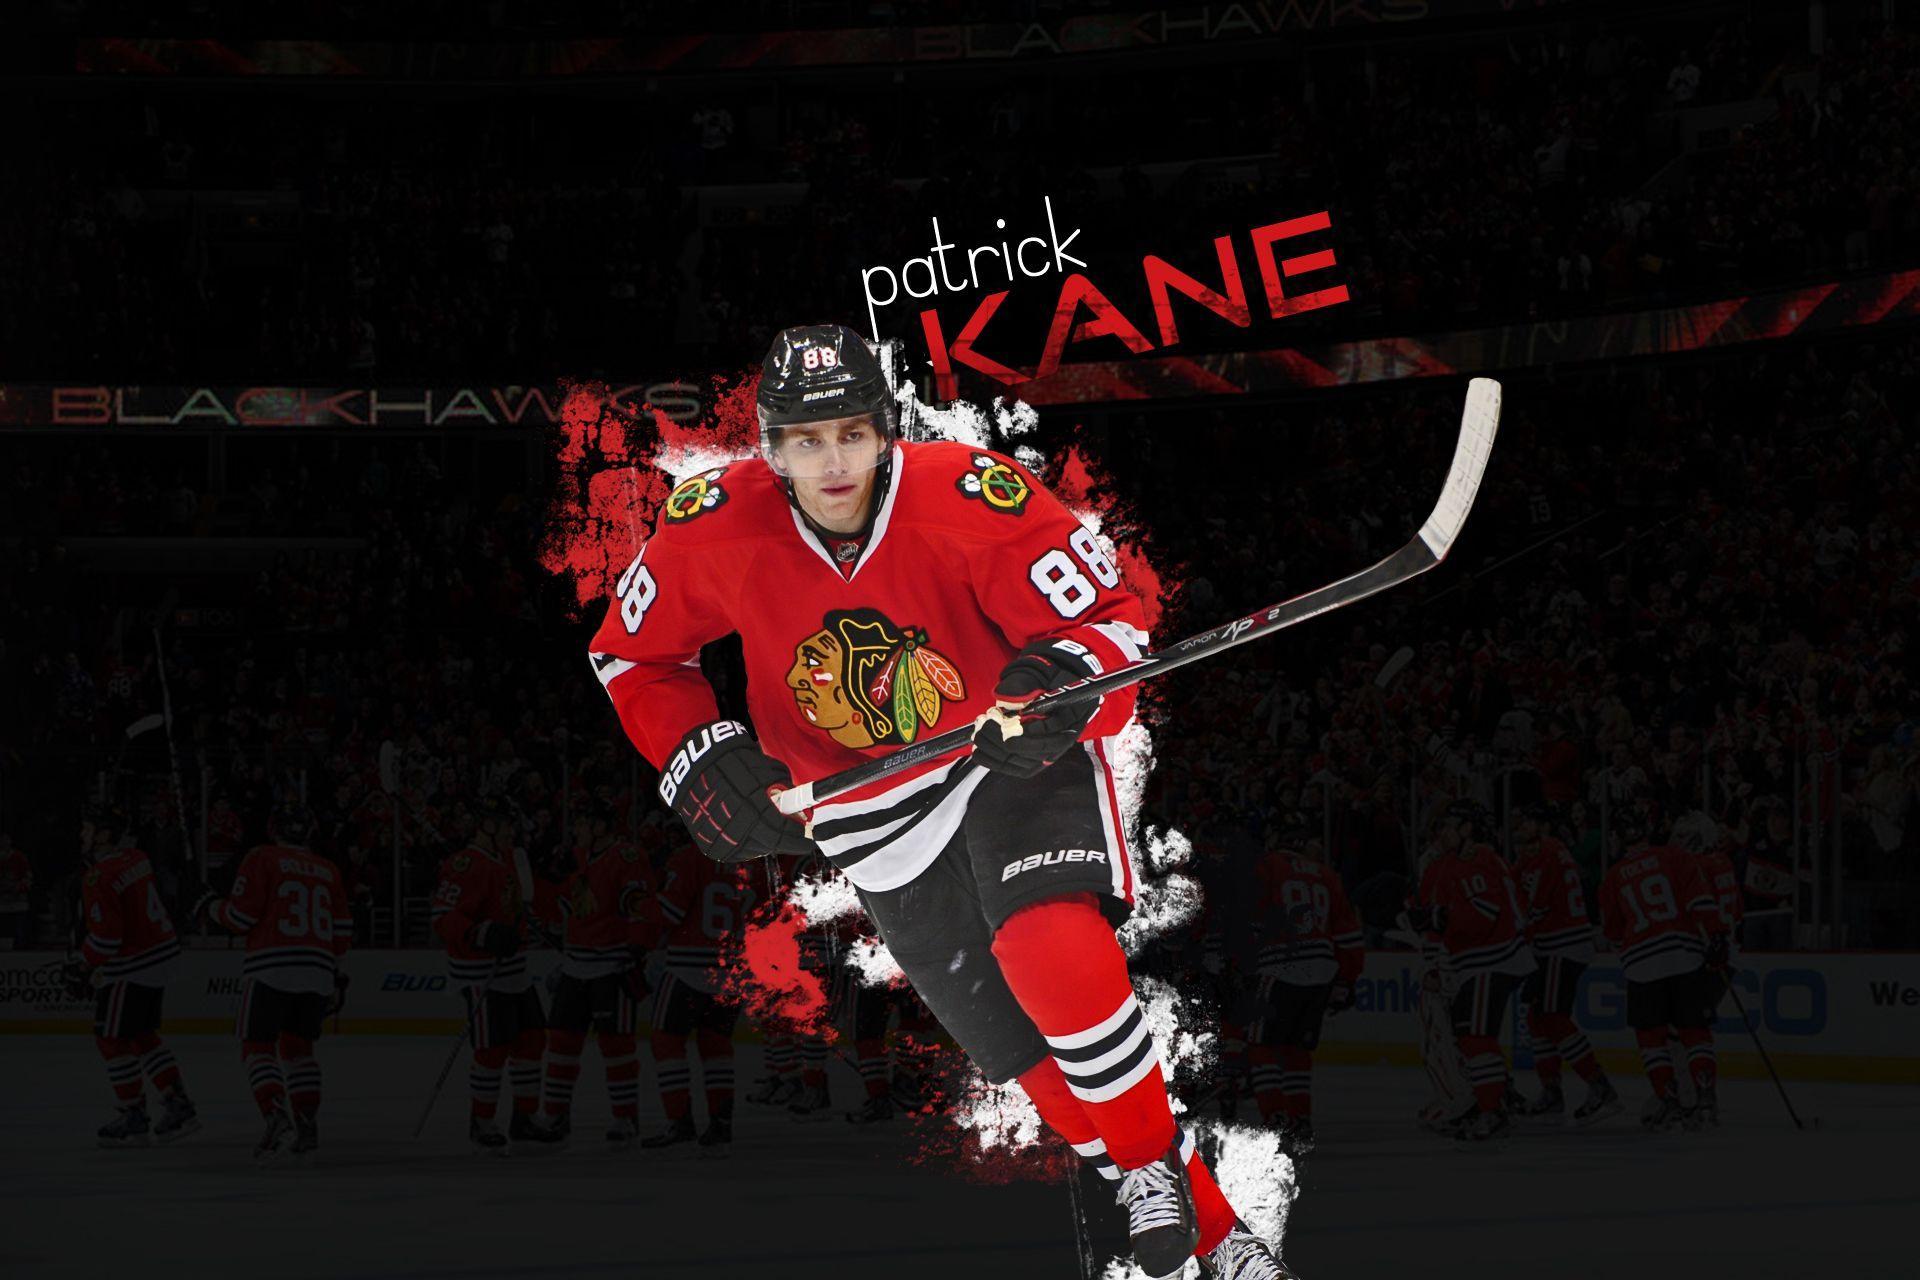 NHL Wallpaper featuring Patrick Kane from Chicago Blackhawks. Don